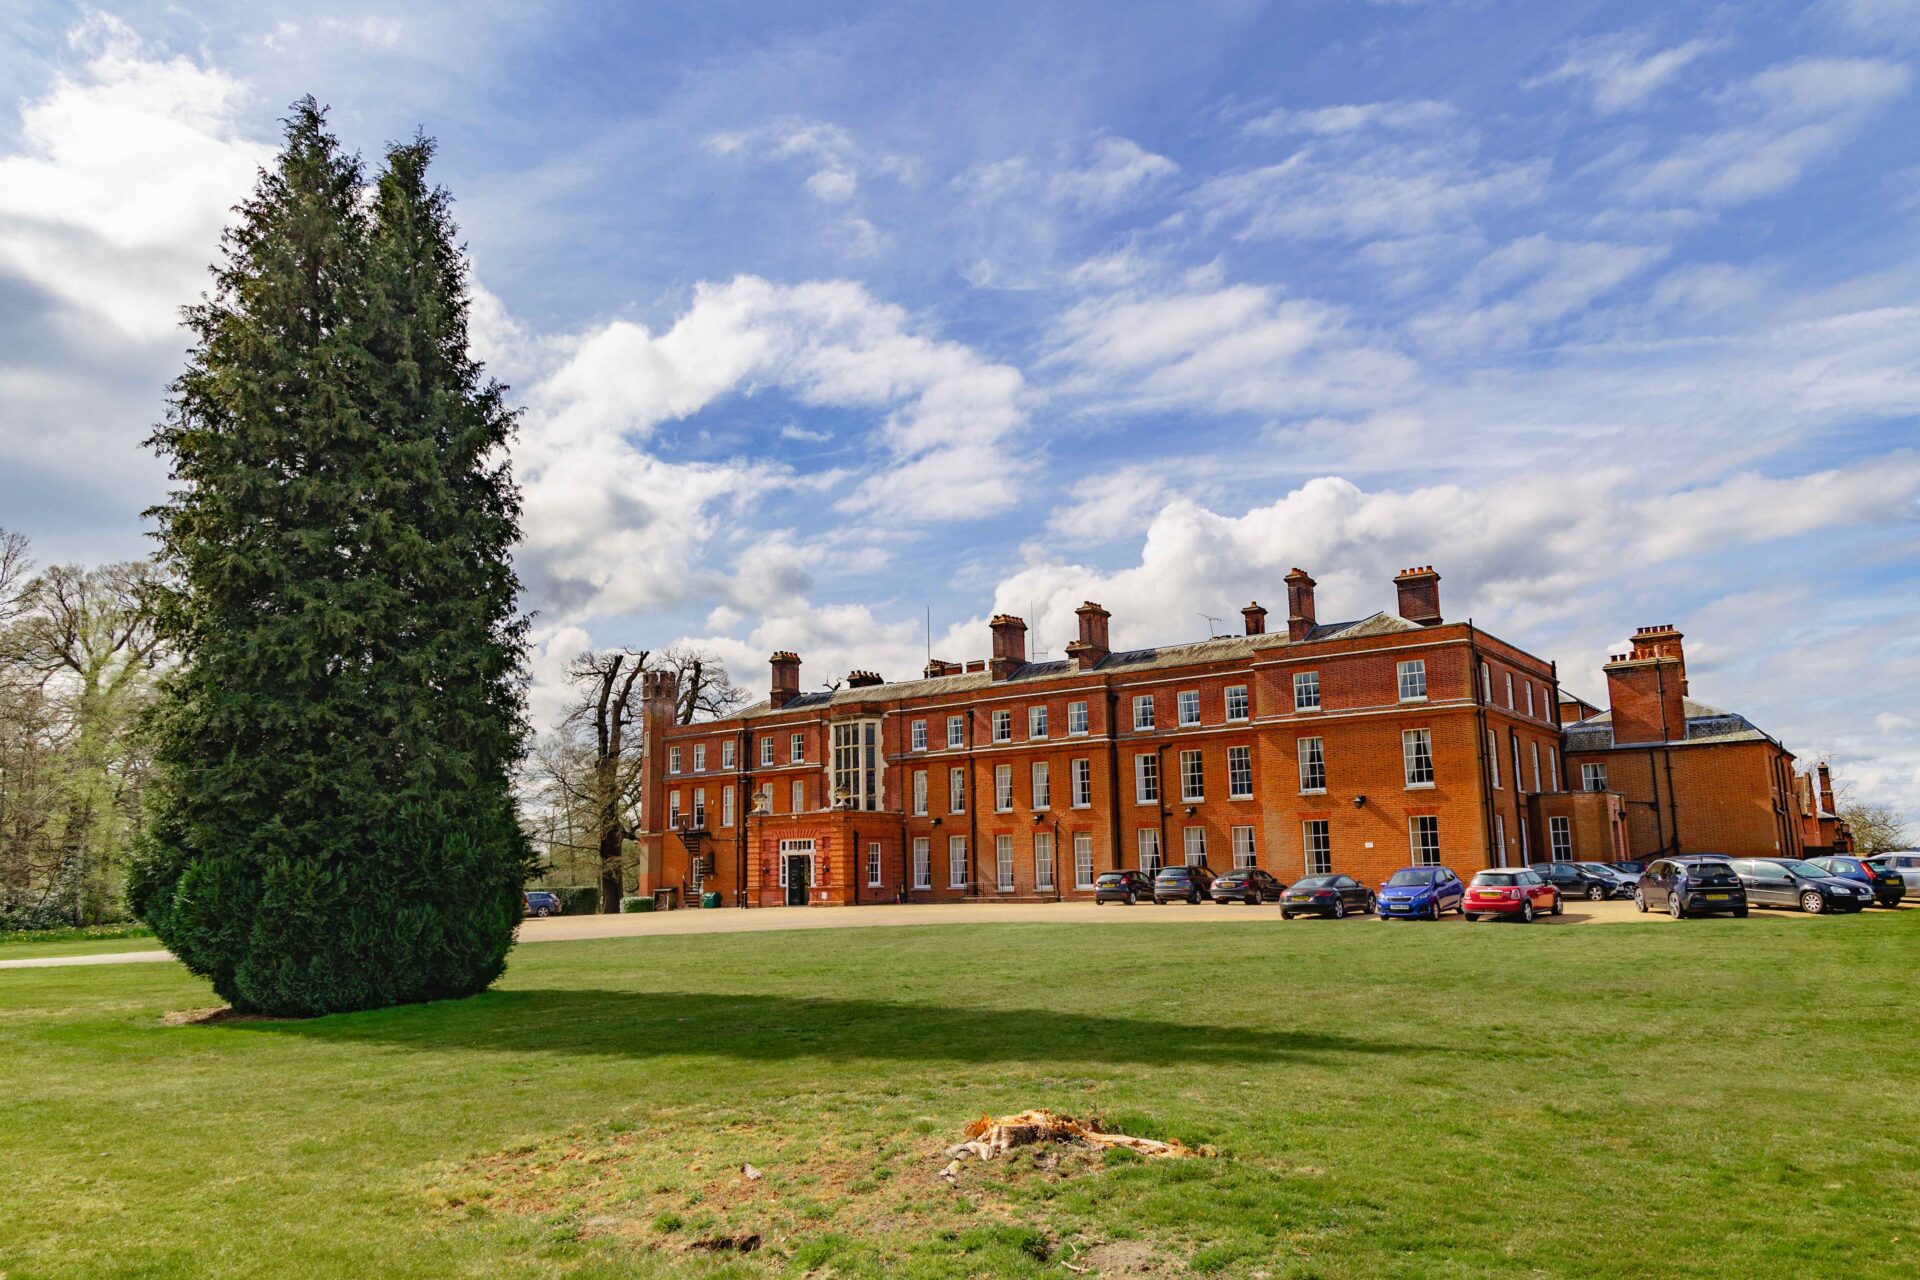 The Cumberland Lodge venue from the front.